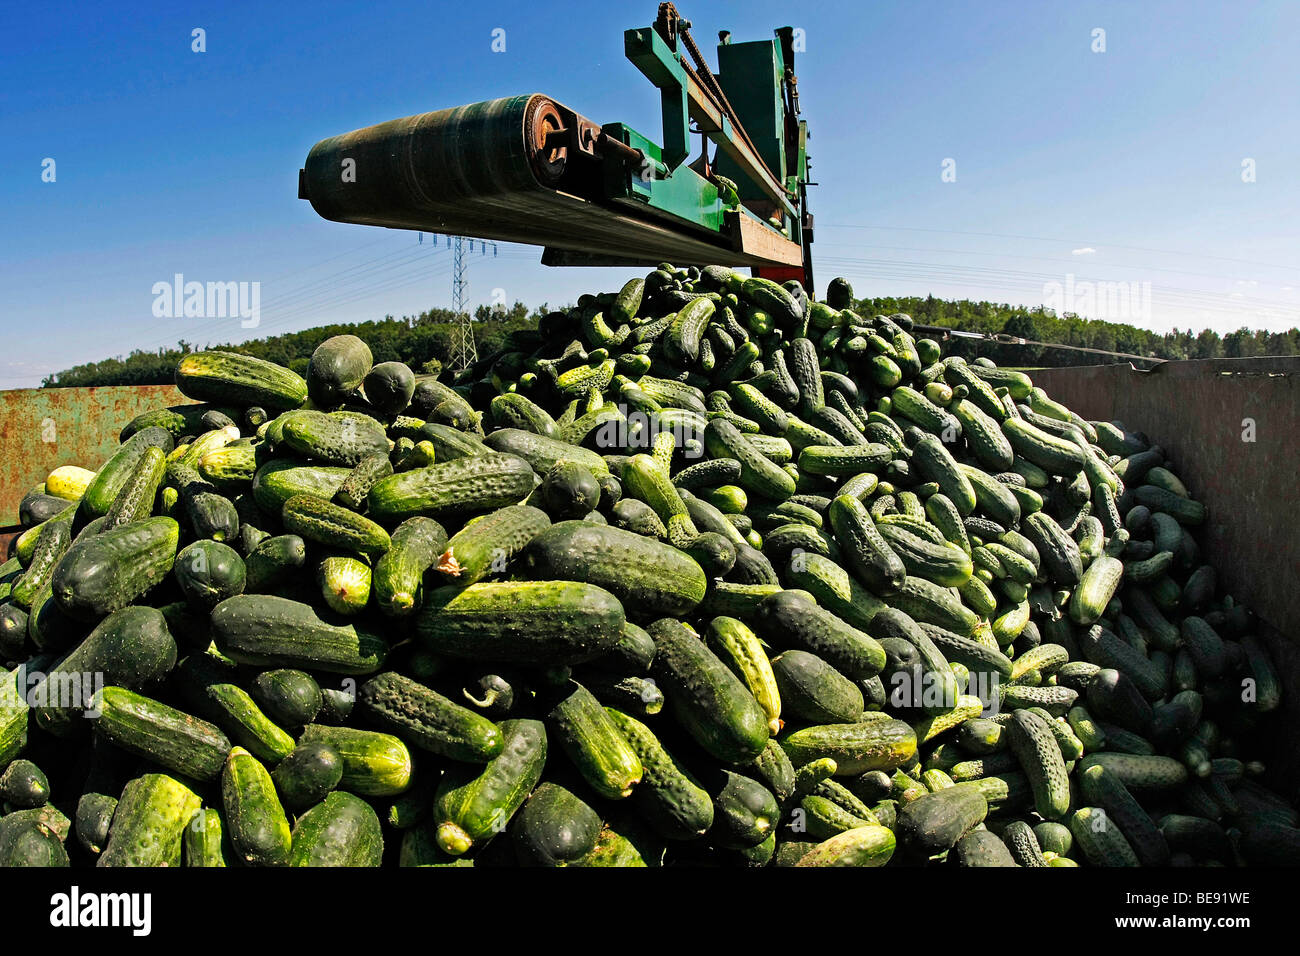 Cucumber harvest using a specialised tractor, cucumbers fall from the conveyor belt on the trailer, Spreewald, Brandenburg, Ger Stock Photo